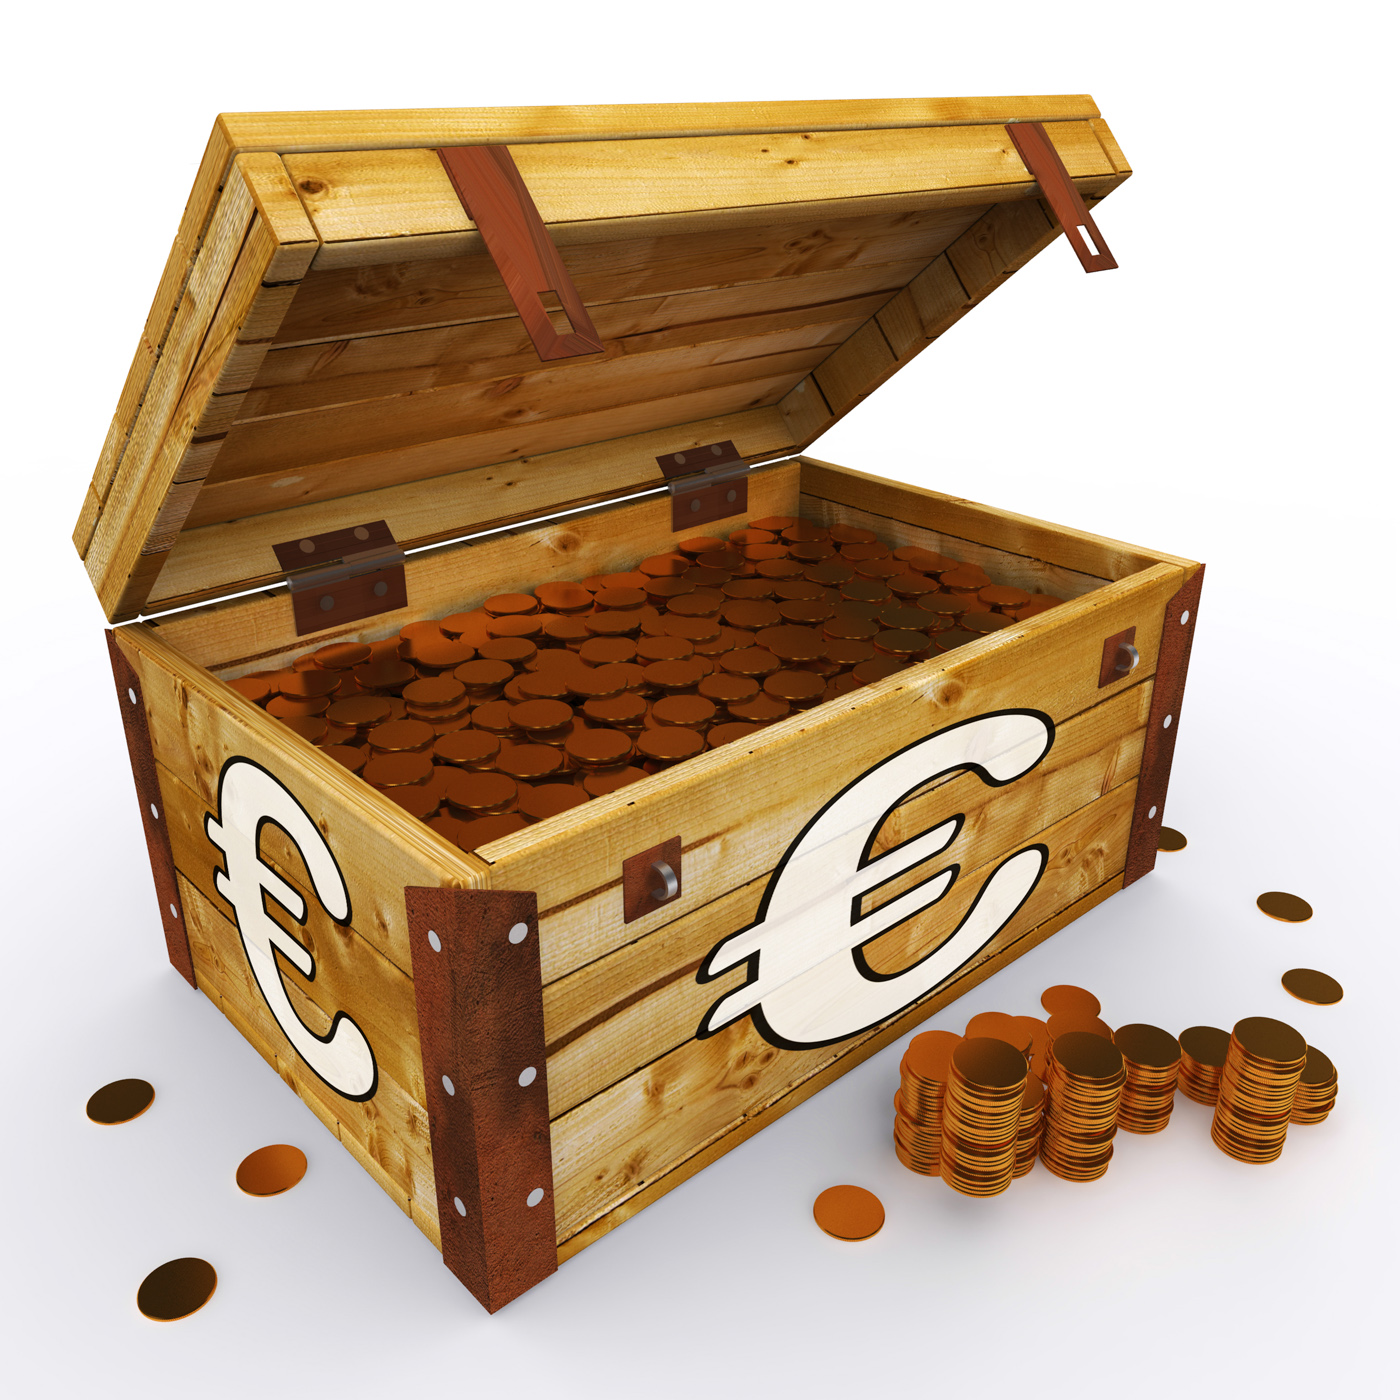 Euro chest of coins shows european prosperity and economy photo